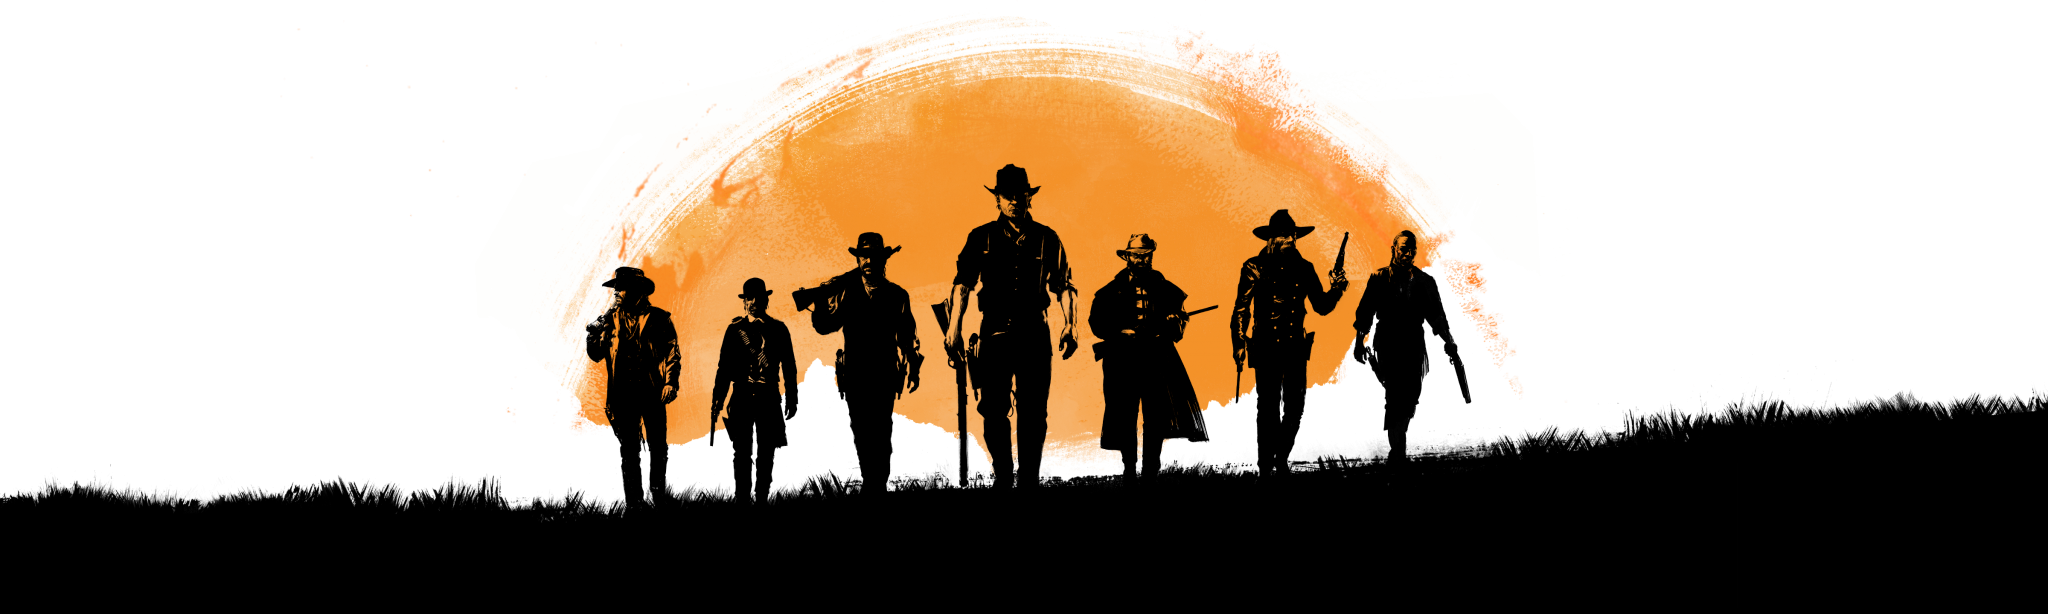 Undead Silhouette Redemption Auto Nightmare Dead Heat PNG Image